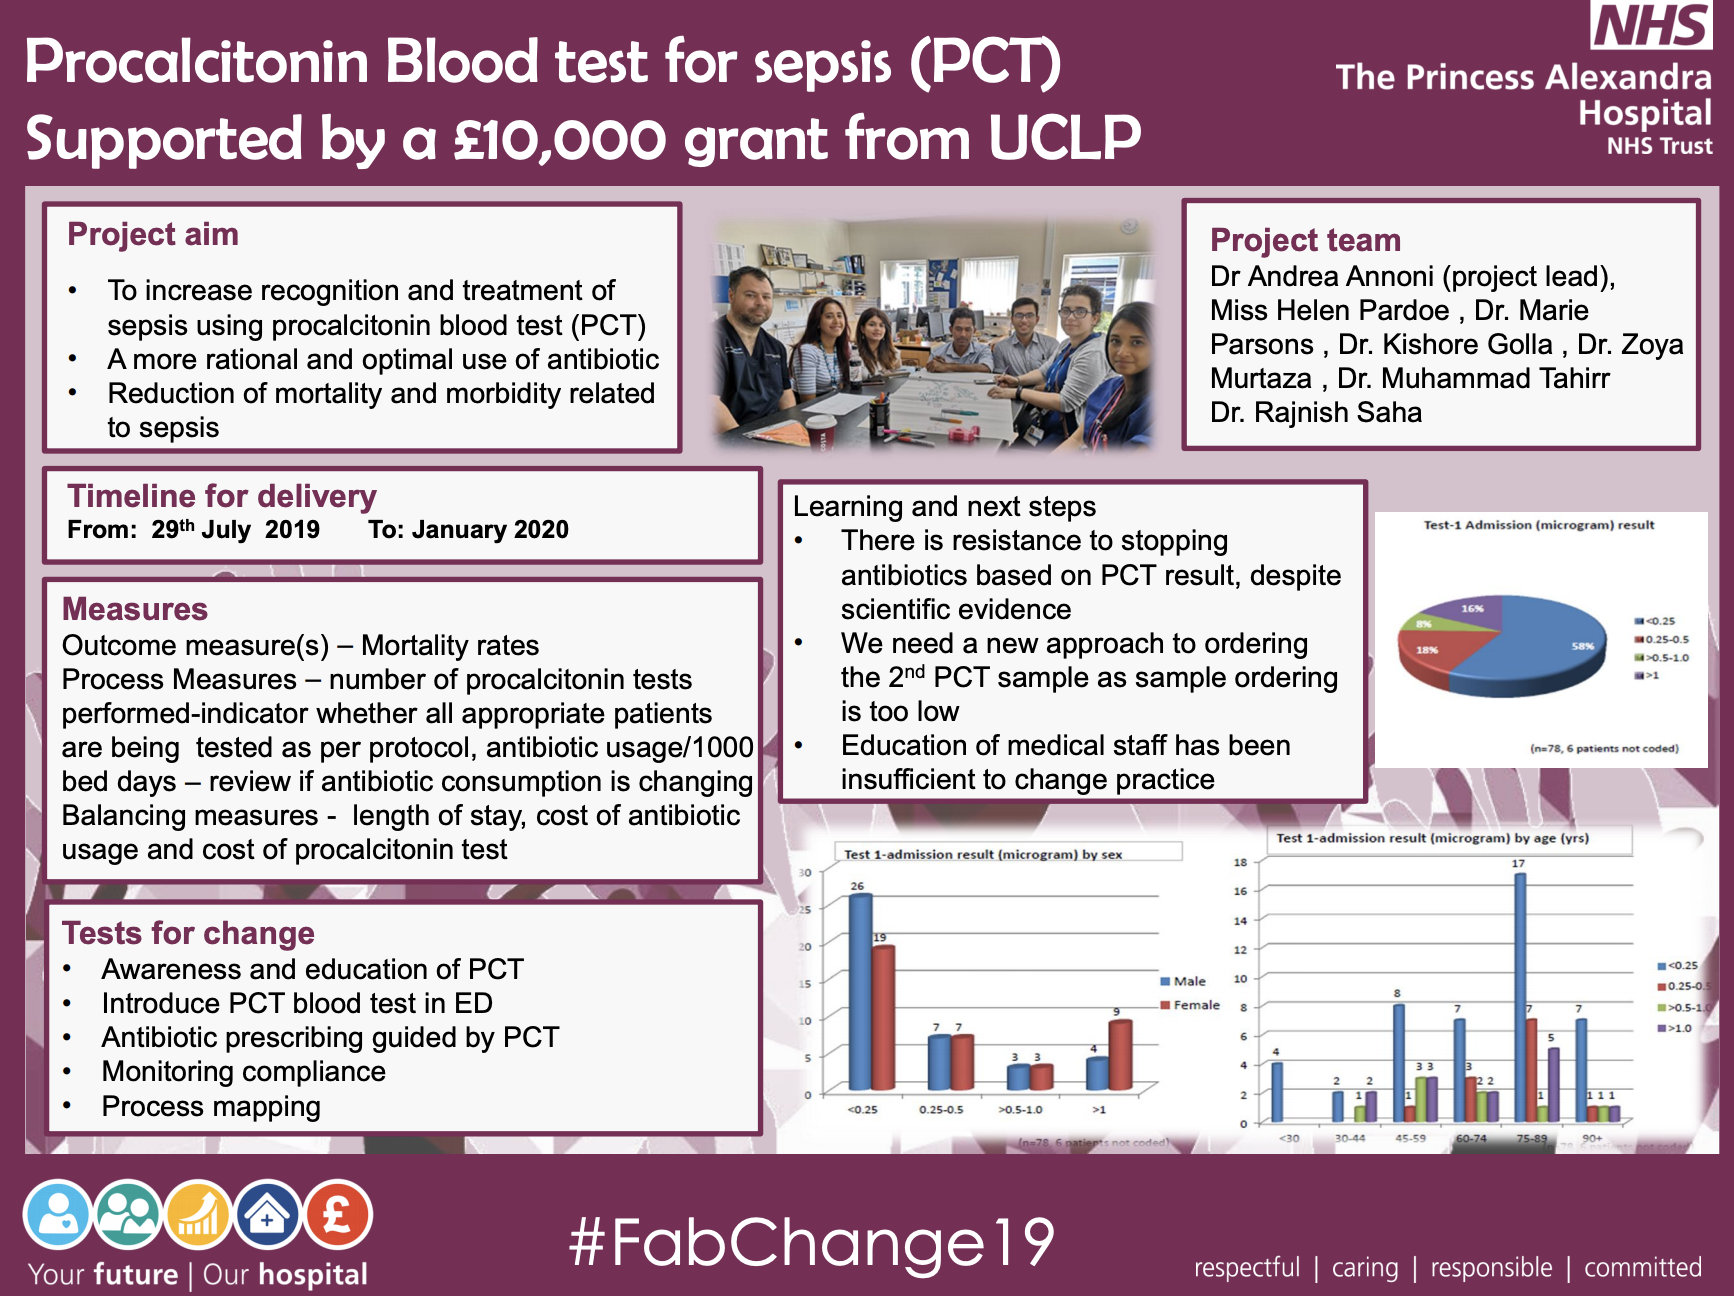 Procalcitonin Blood test for Sepsis (PCT) Supported by a £10,000 grant from UCLP - @QualityFirstPAH featured image